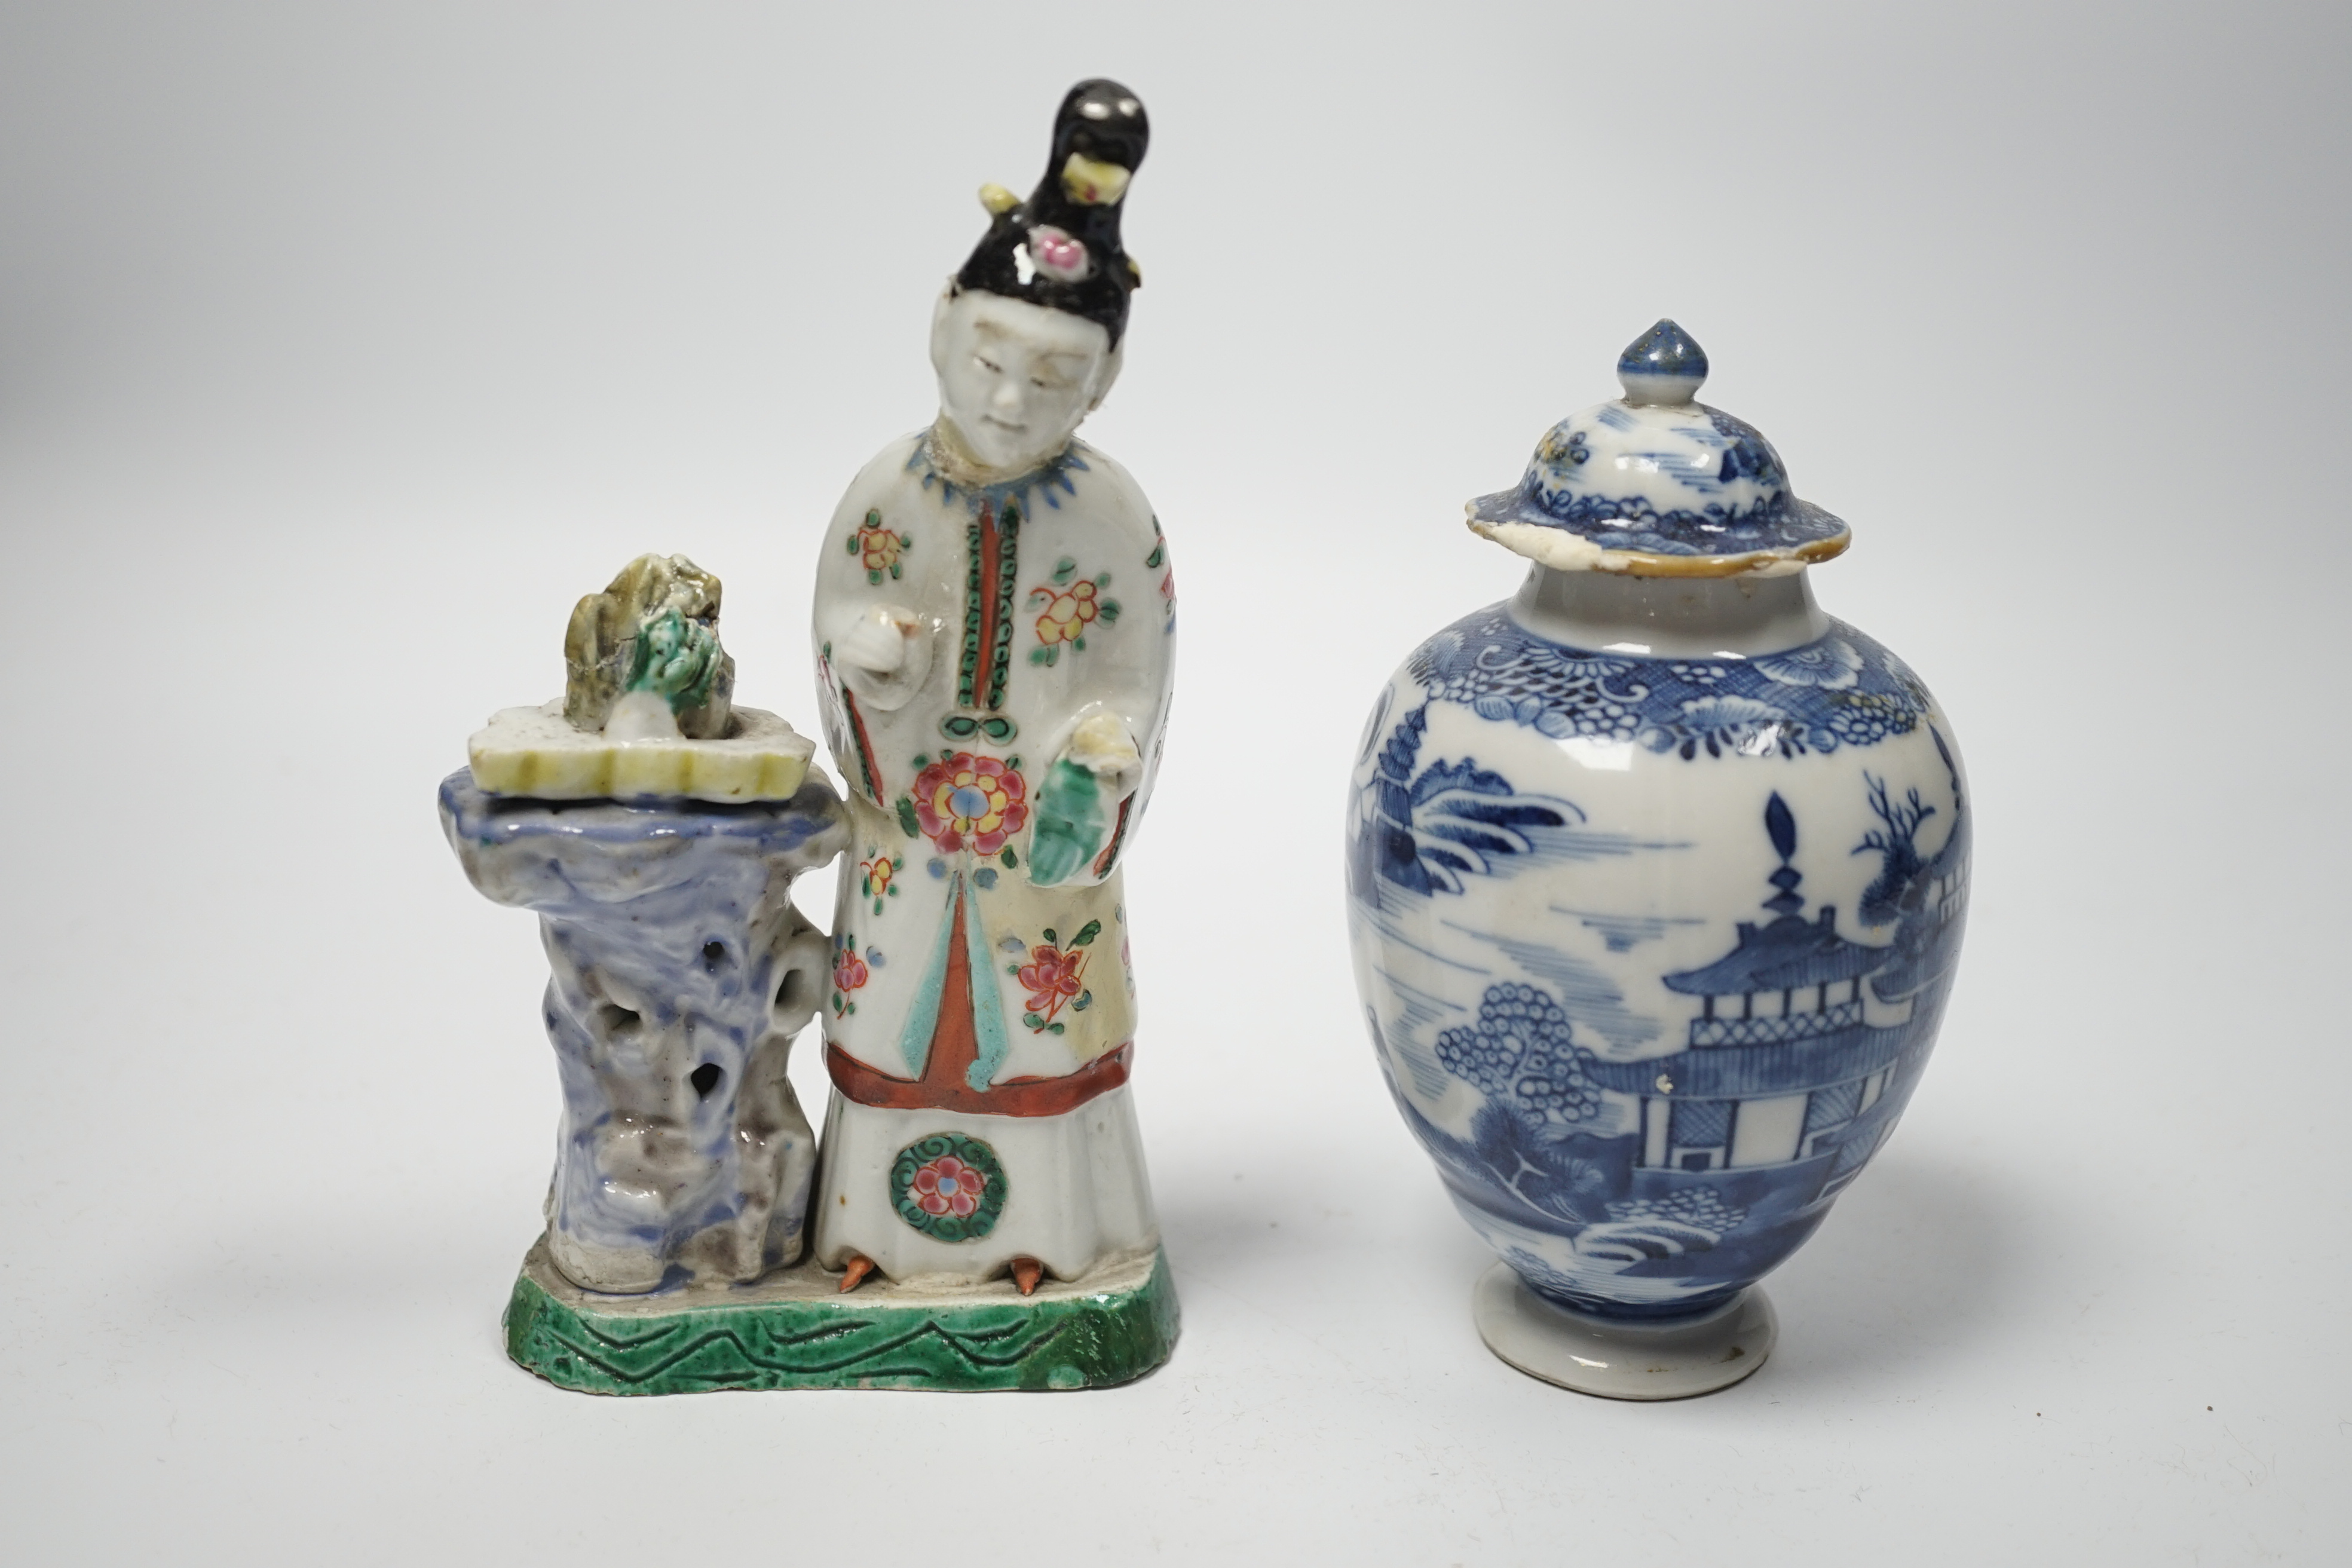 An 18th century Chinese enamelled porcelain figure of a lady standing by rockwork, a similar miniature vase and a blue and white tea caddy and cover, largest 17cm high